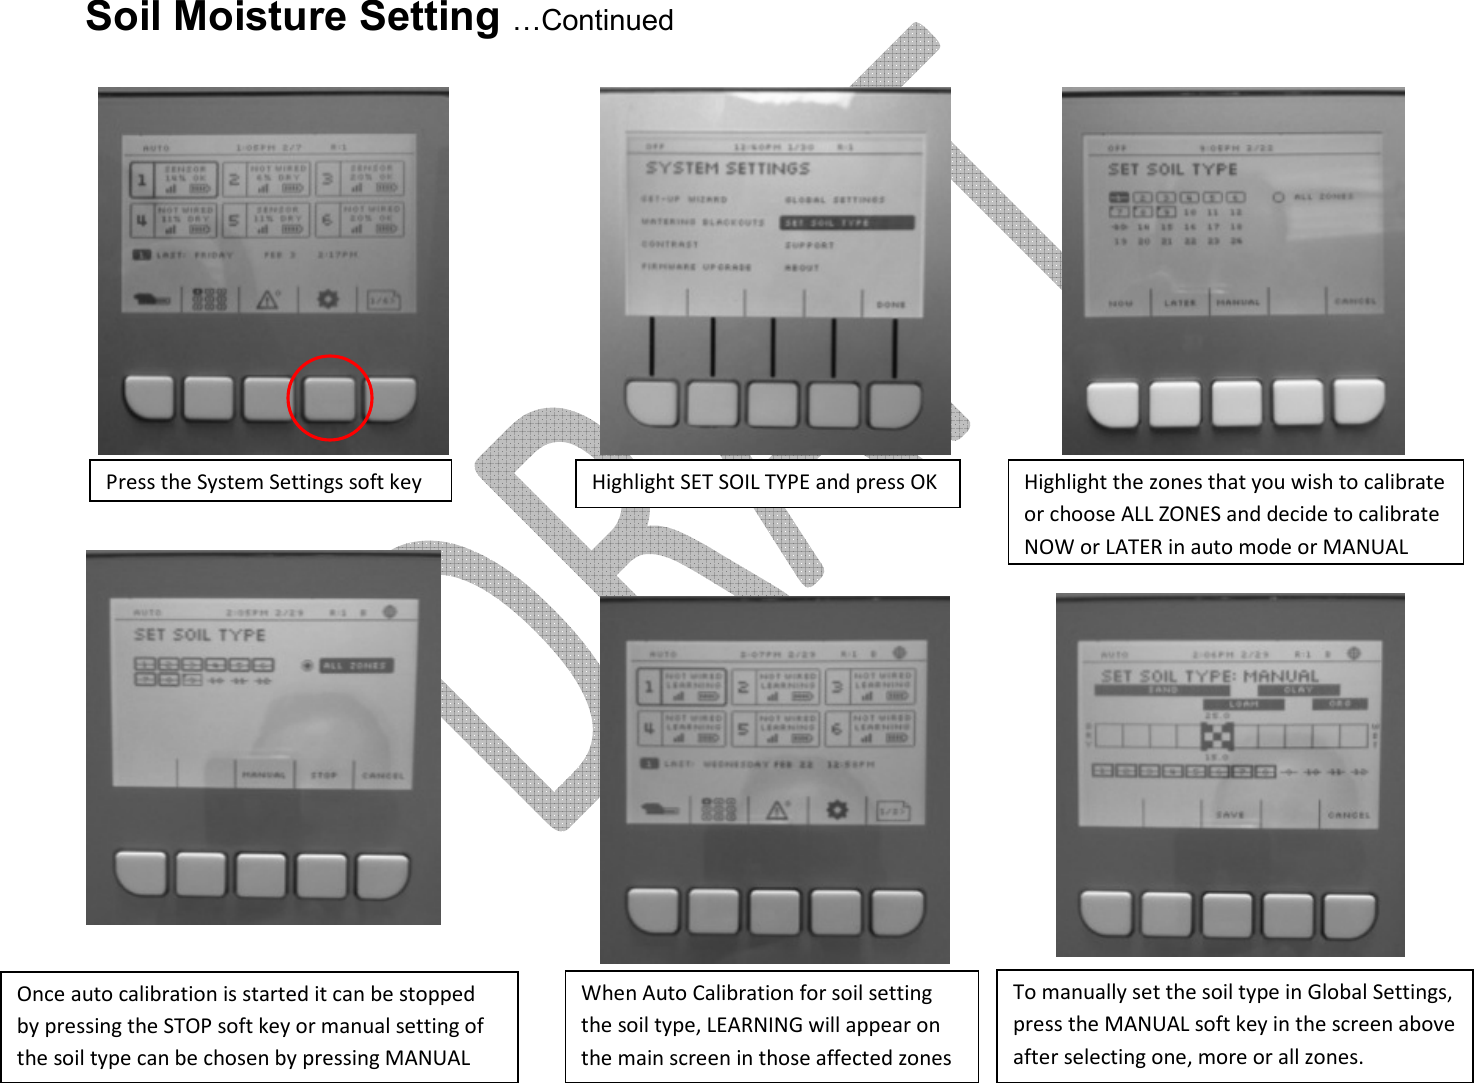      Soil Moisture Setting …Continued           Press the System Settings soft key Highlight SET SOIL TYPE and press OK Highlight the zones that you wish to calibrate or choose ALL ZONES and decide to calibrate NOW or LATER in auto mode or MANUAL Once auto calibration is started it can be stopped by pressing the STOP soft key or manual setting of the soil type can be chosen by pressing MANUAL When Auto Calibration for soil setting the soil type, LEARNING will appear on the main screen in those affected zones To manually set the soil type in Global Settings, press the MANUAL soft key in the screen above after selecting one, more or all zones. 